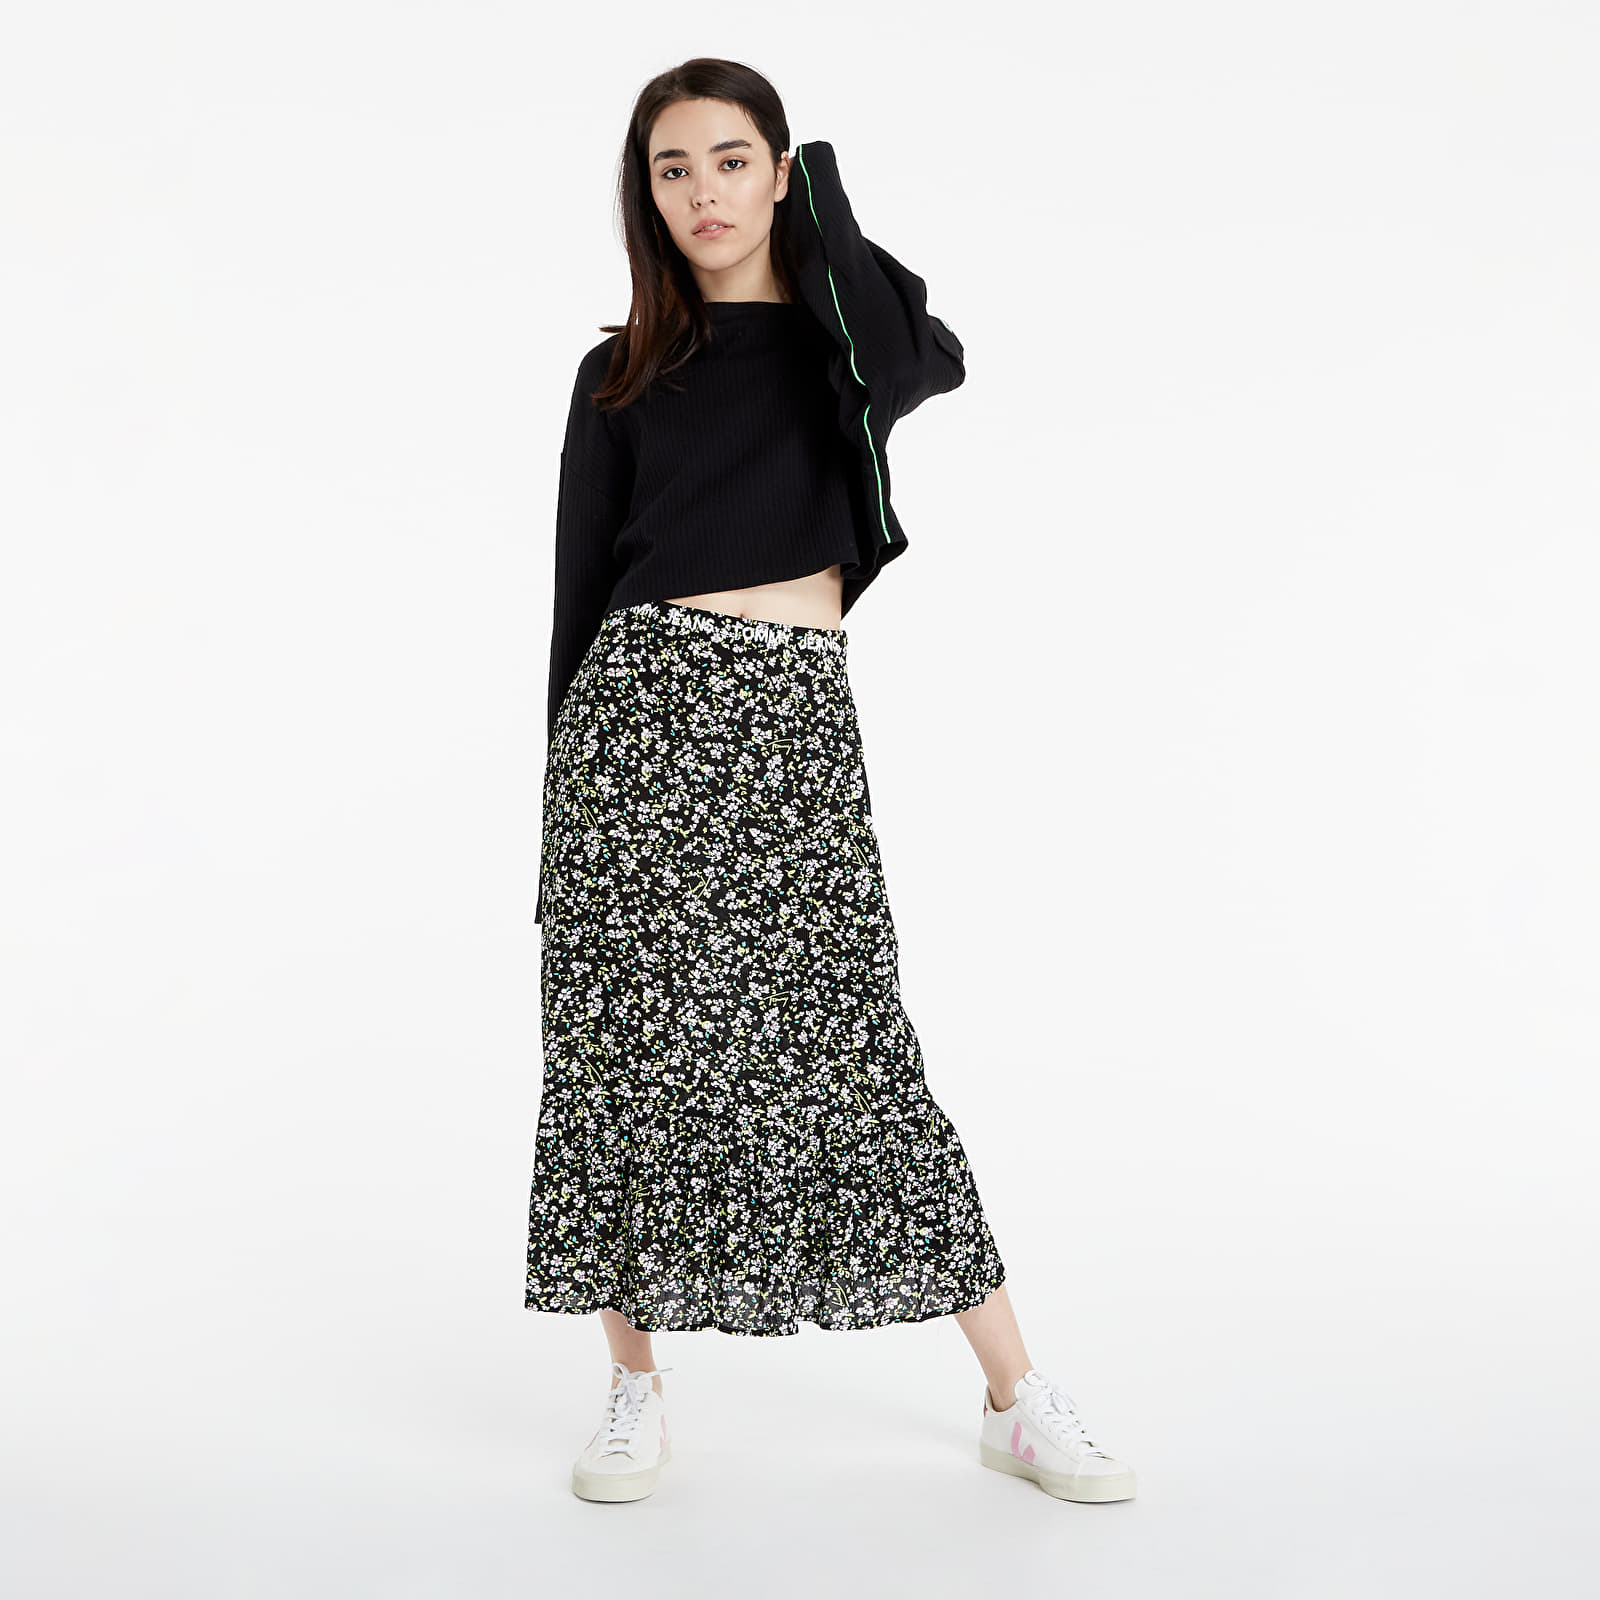 Midi | Tommy Footshop Skirt Print Skirts Floral Jeans Floral Tiered